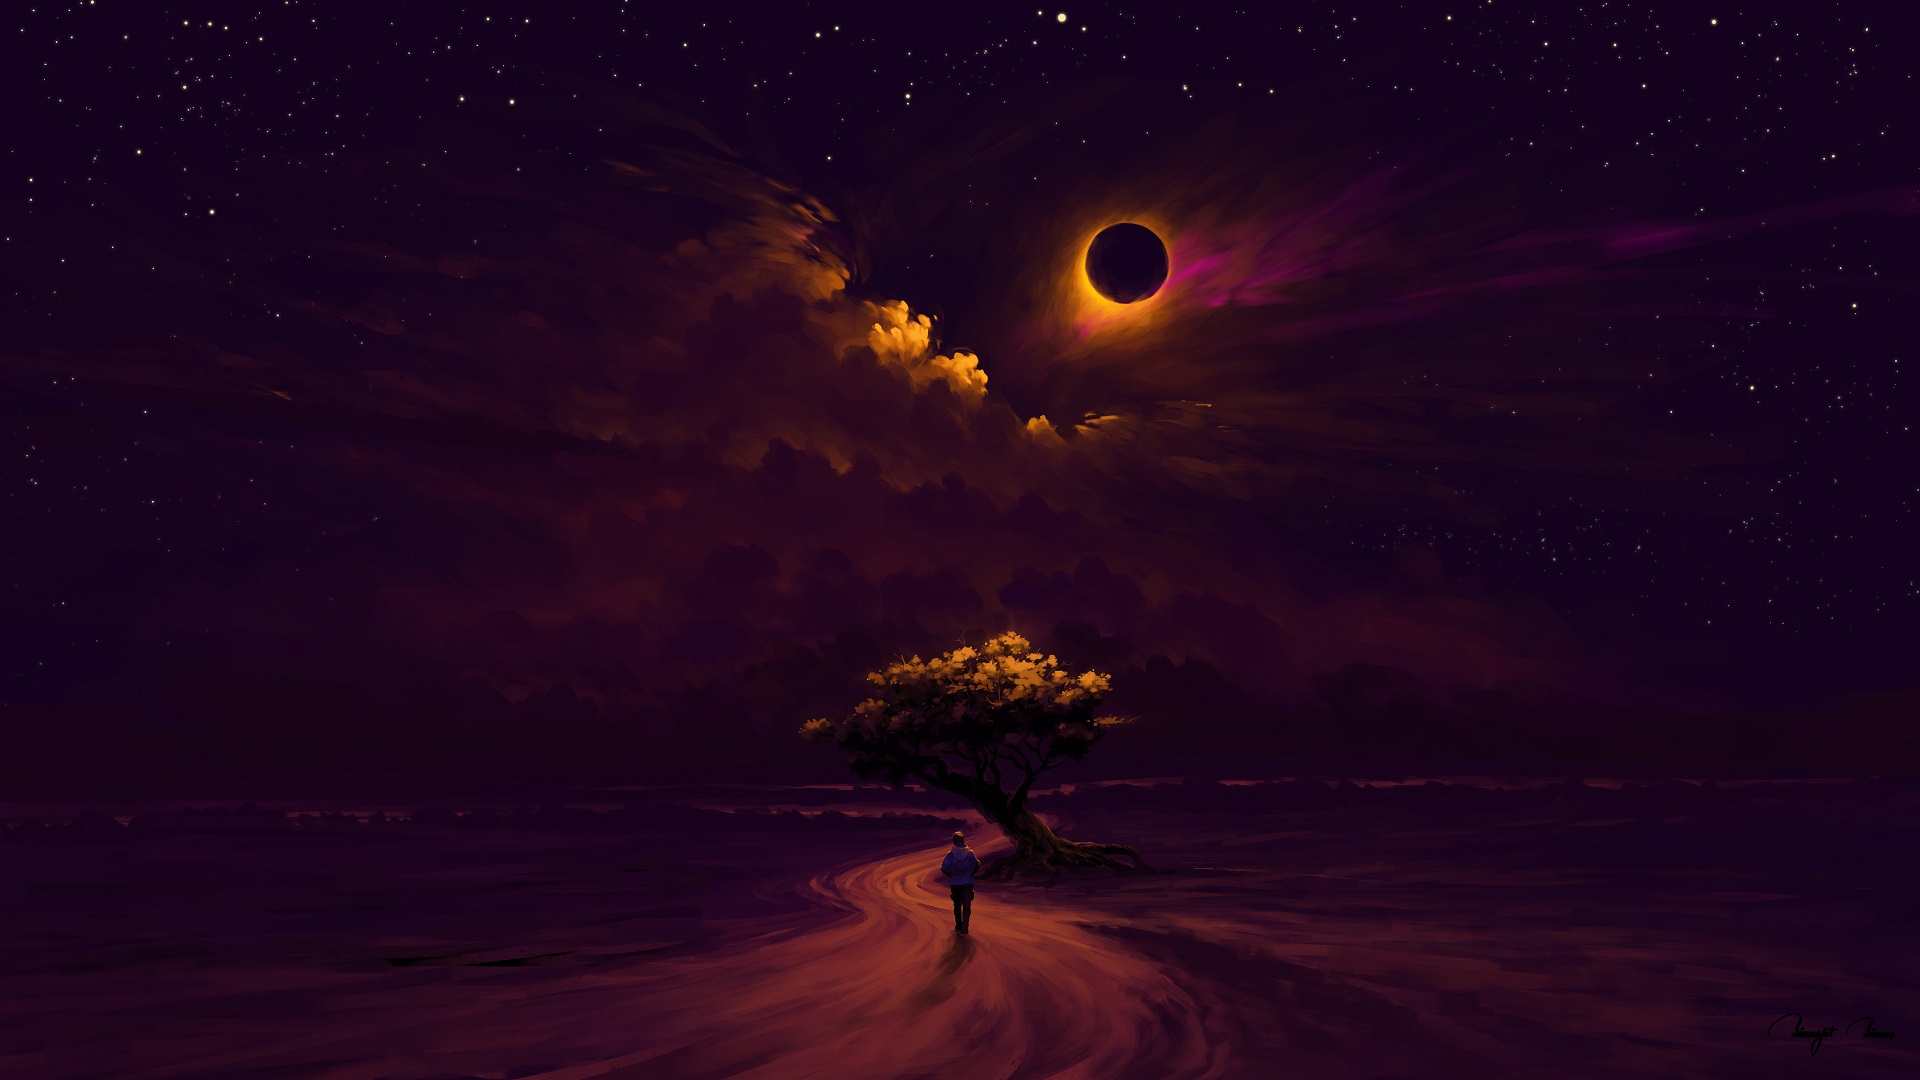 BisBiswas Digital Art Nature Paint Brushes Landscape Digital Painting Eclipse Night Clouds Path Tree 1920x1080